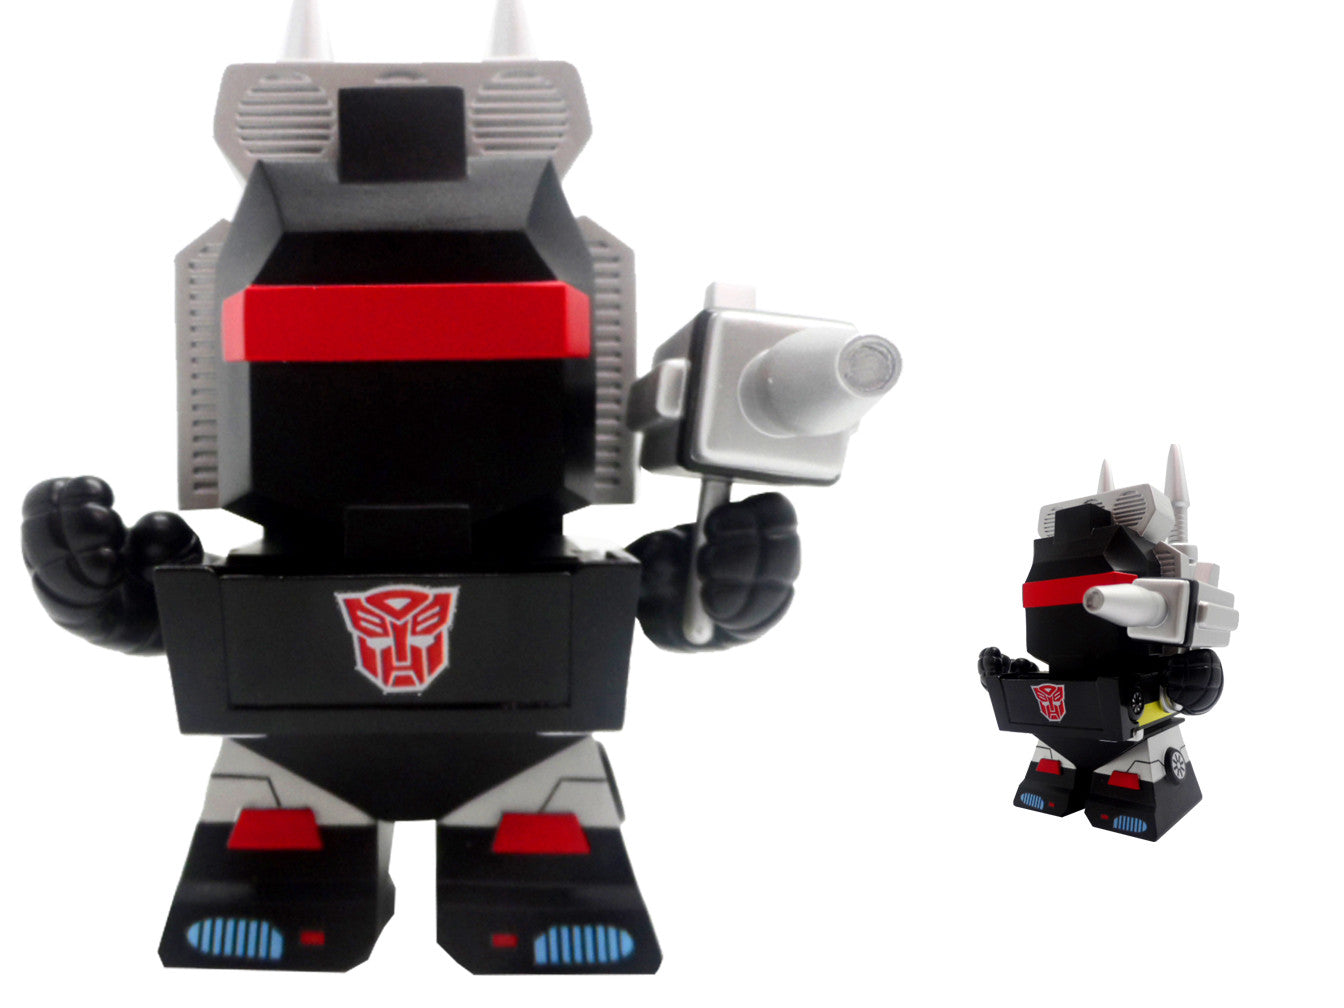 Transformers Series Three Mini Figures by The Loyal Subjects - Mindzai  - 13